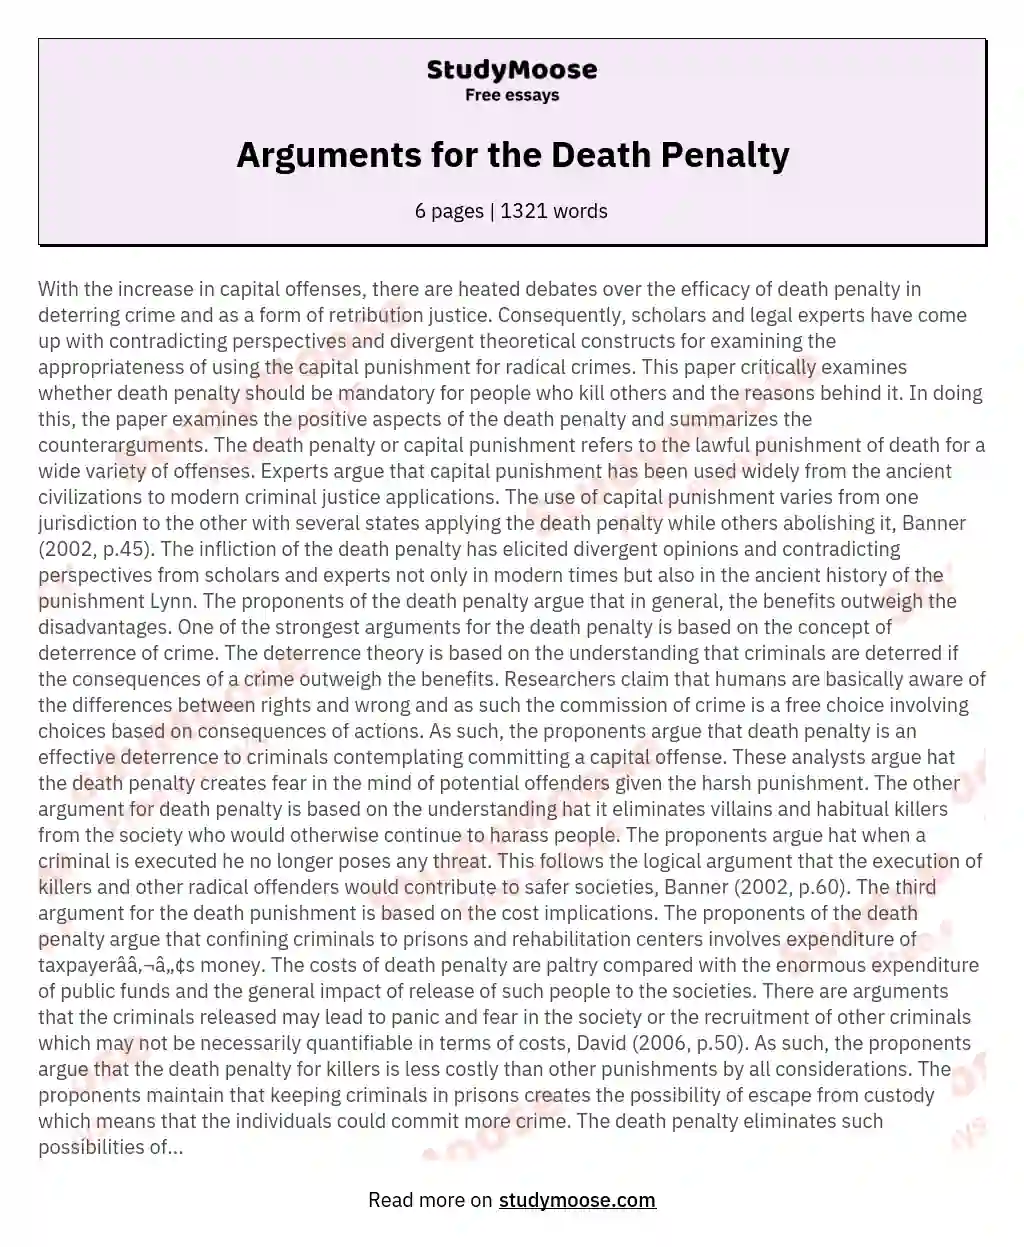 Arguments for the Death Penalty essay